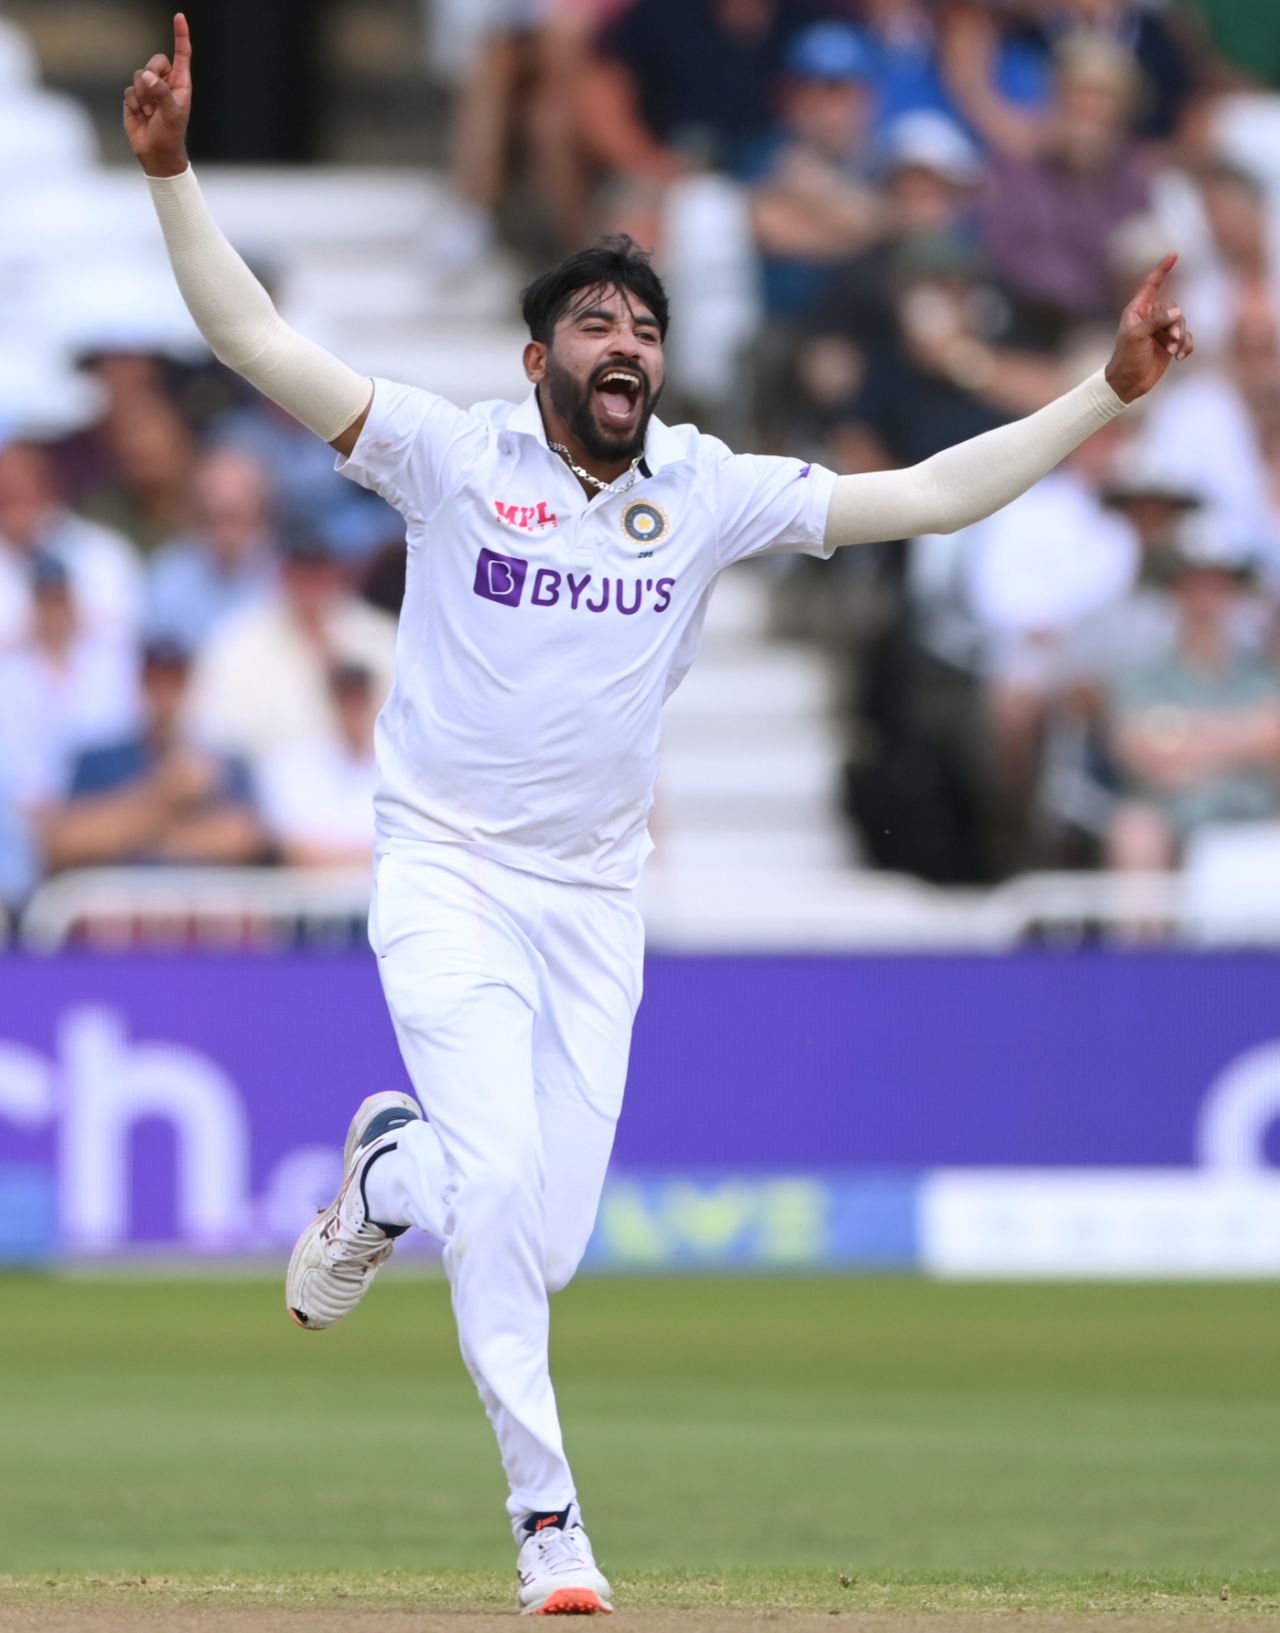 Mohammed Siraj appeals for a wicket, England vs India, 1st Test, Nottingham, 1st day, August 4, 2021